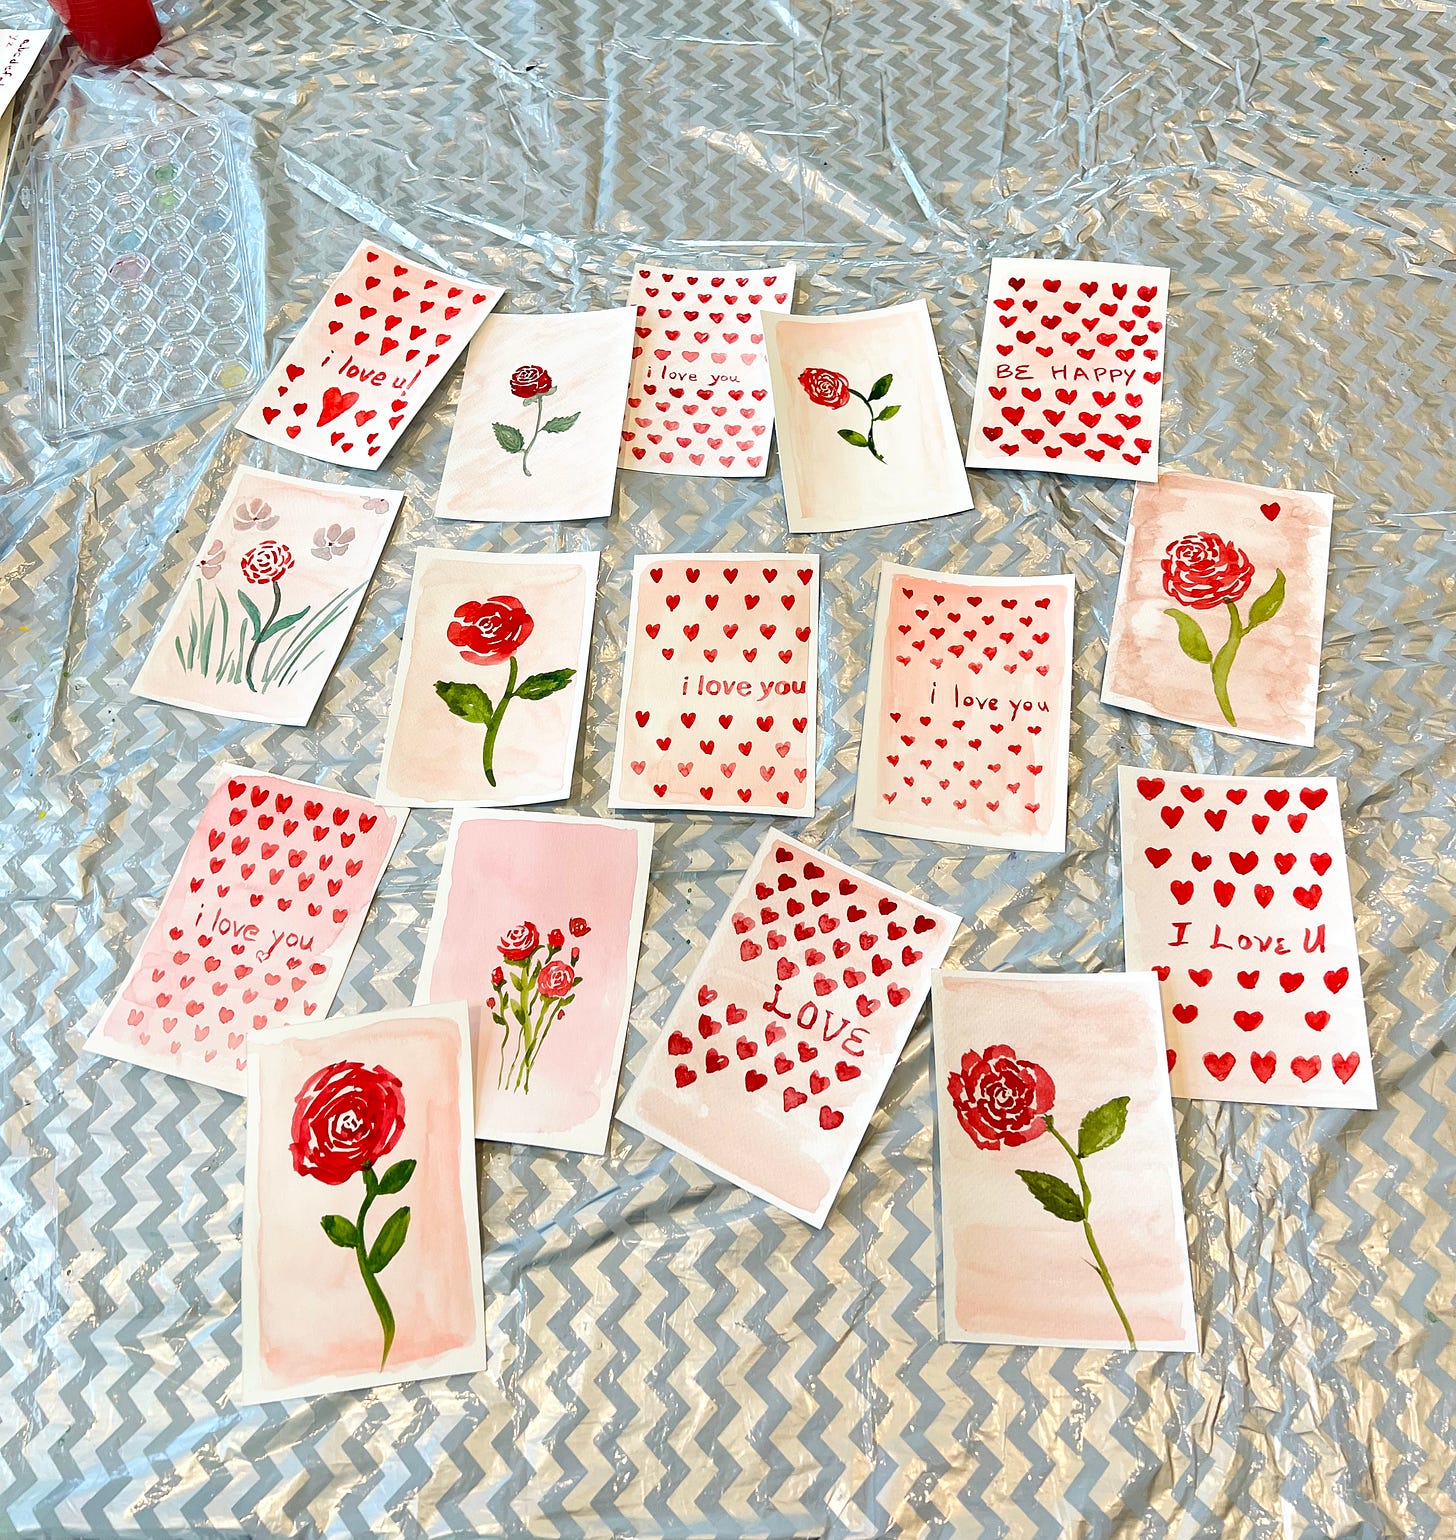 display of multiple watercolor paintings to be used as Valentine's Day cards, in two designs, one of a single stem rose in a loose watercolor style and one with hearts and lettering